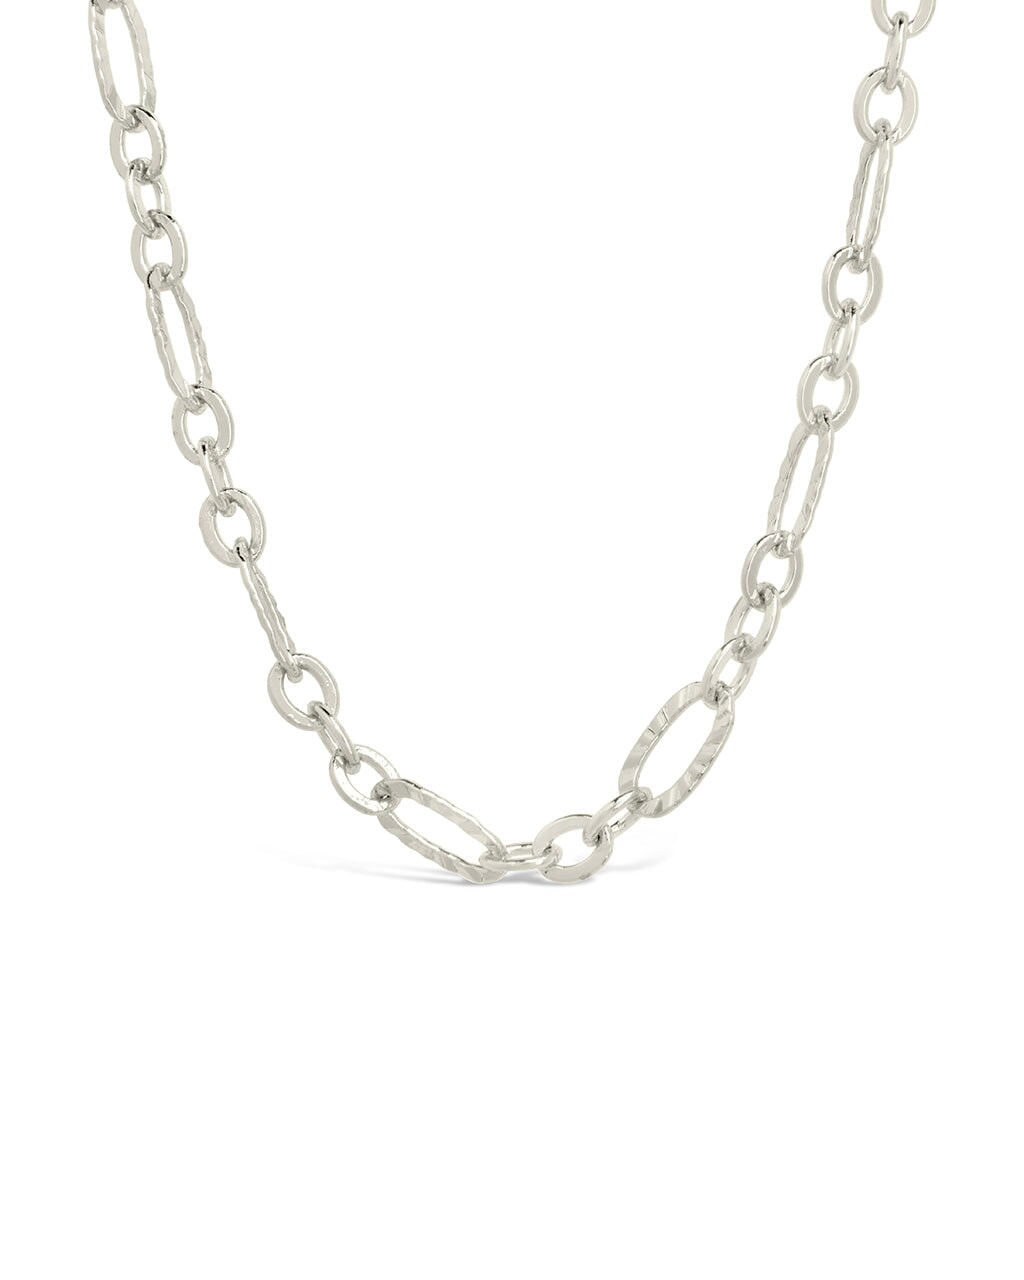 Elysia Chain Necklace Necklace Sterling Forever Silver 